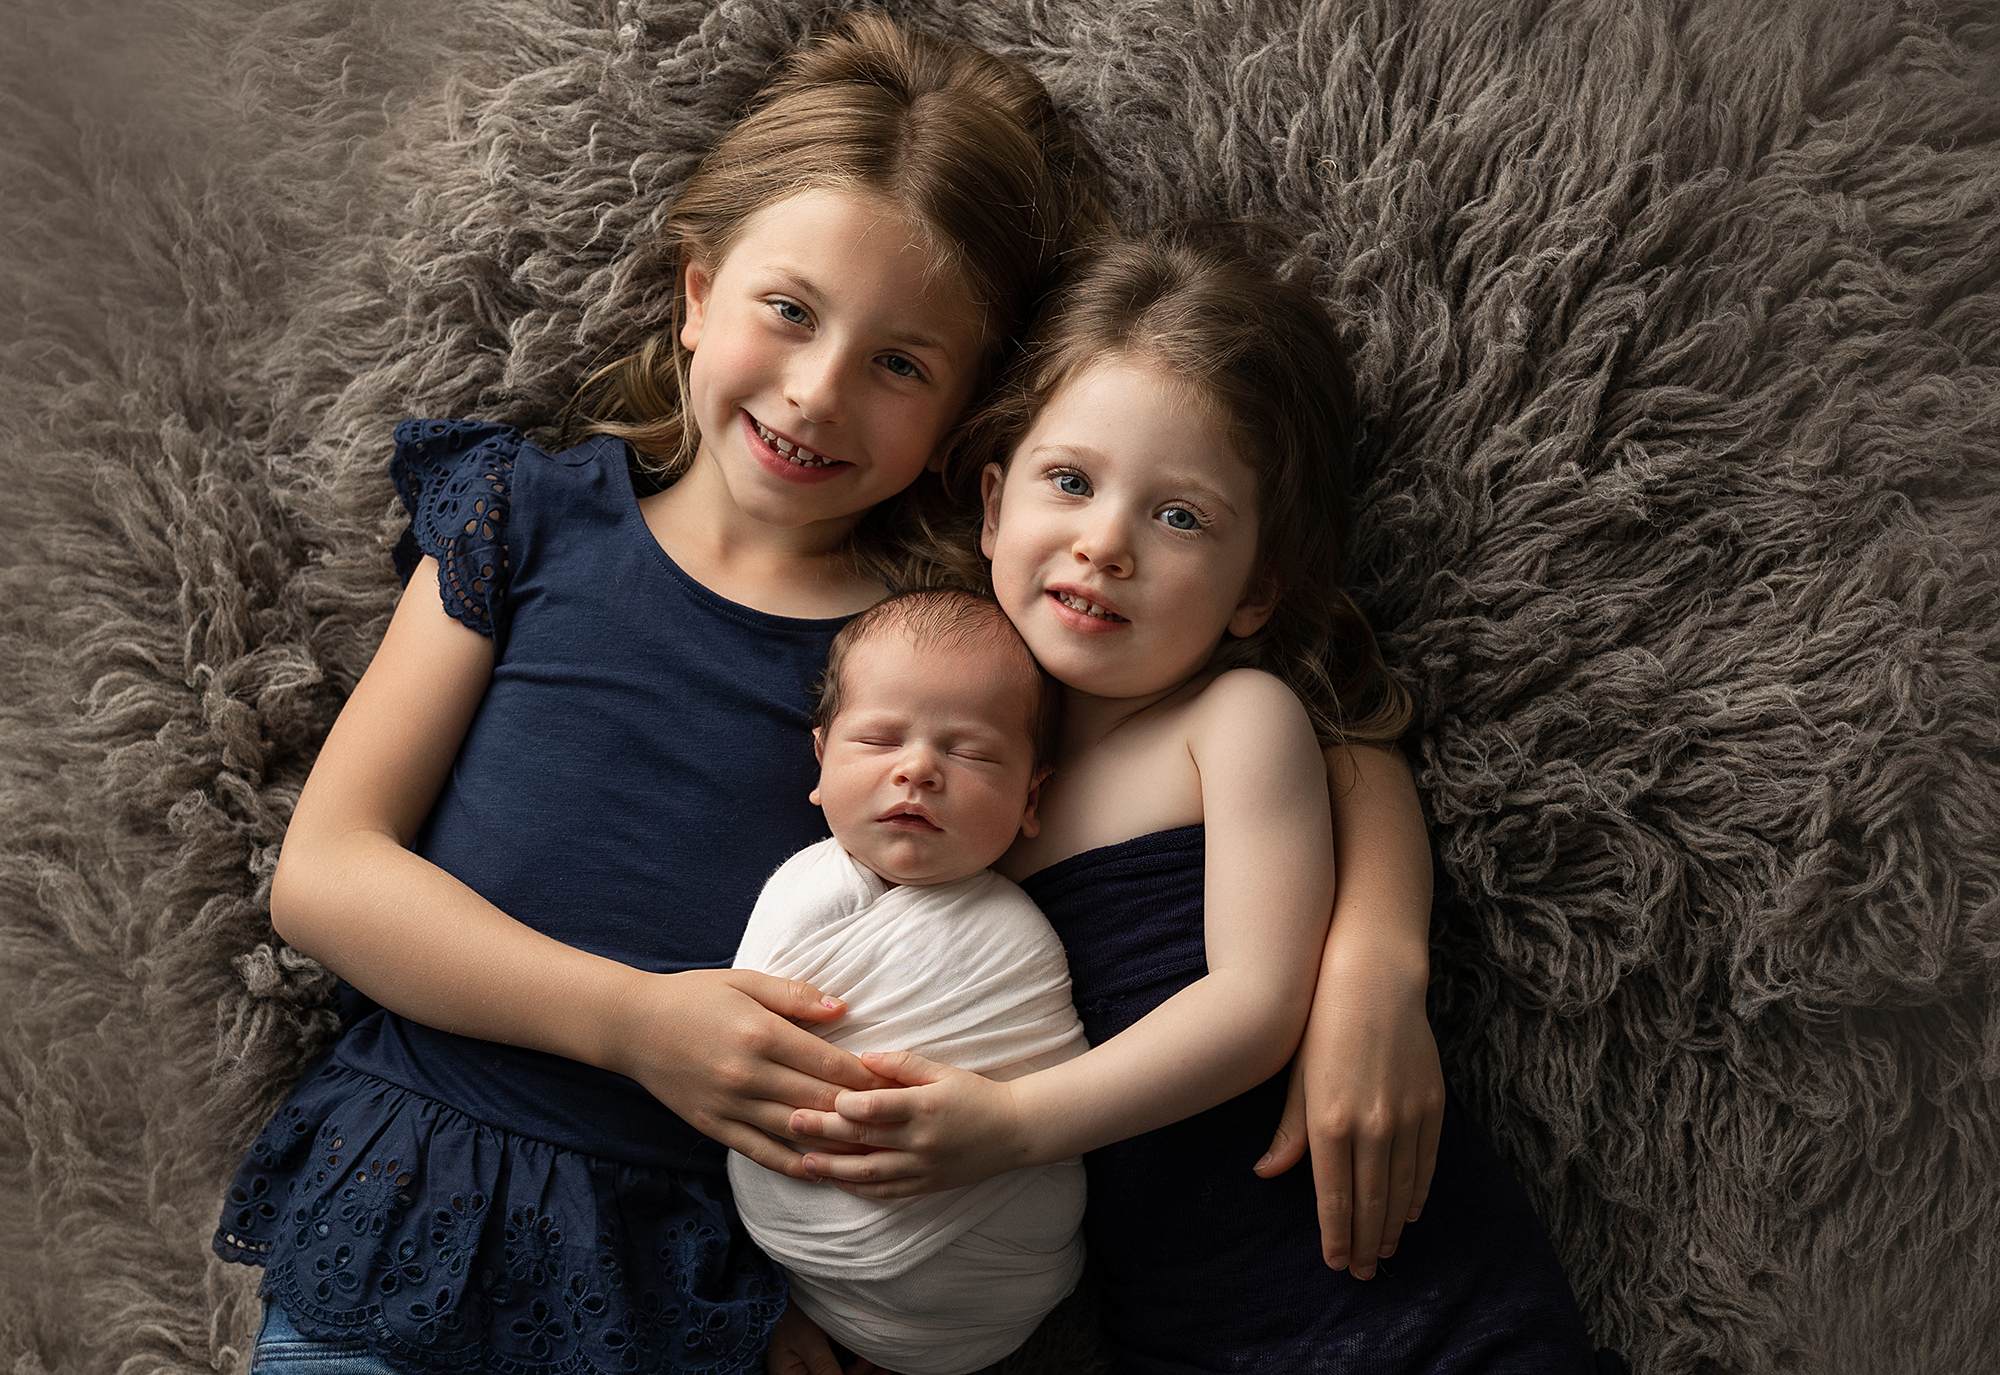 Cute Sisters Posing With Their Little Baby Sibling